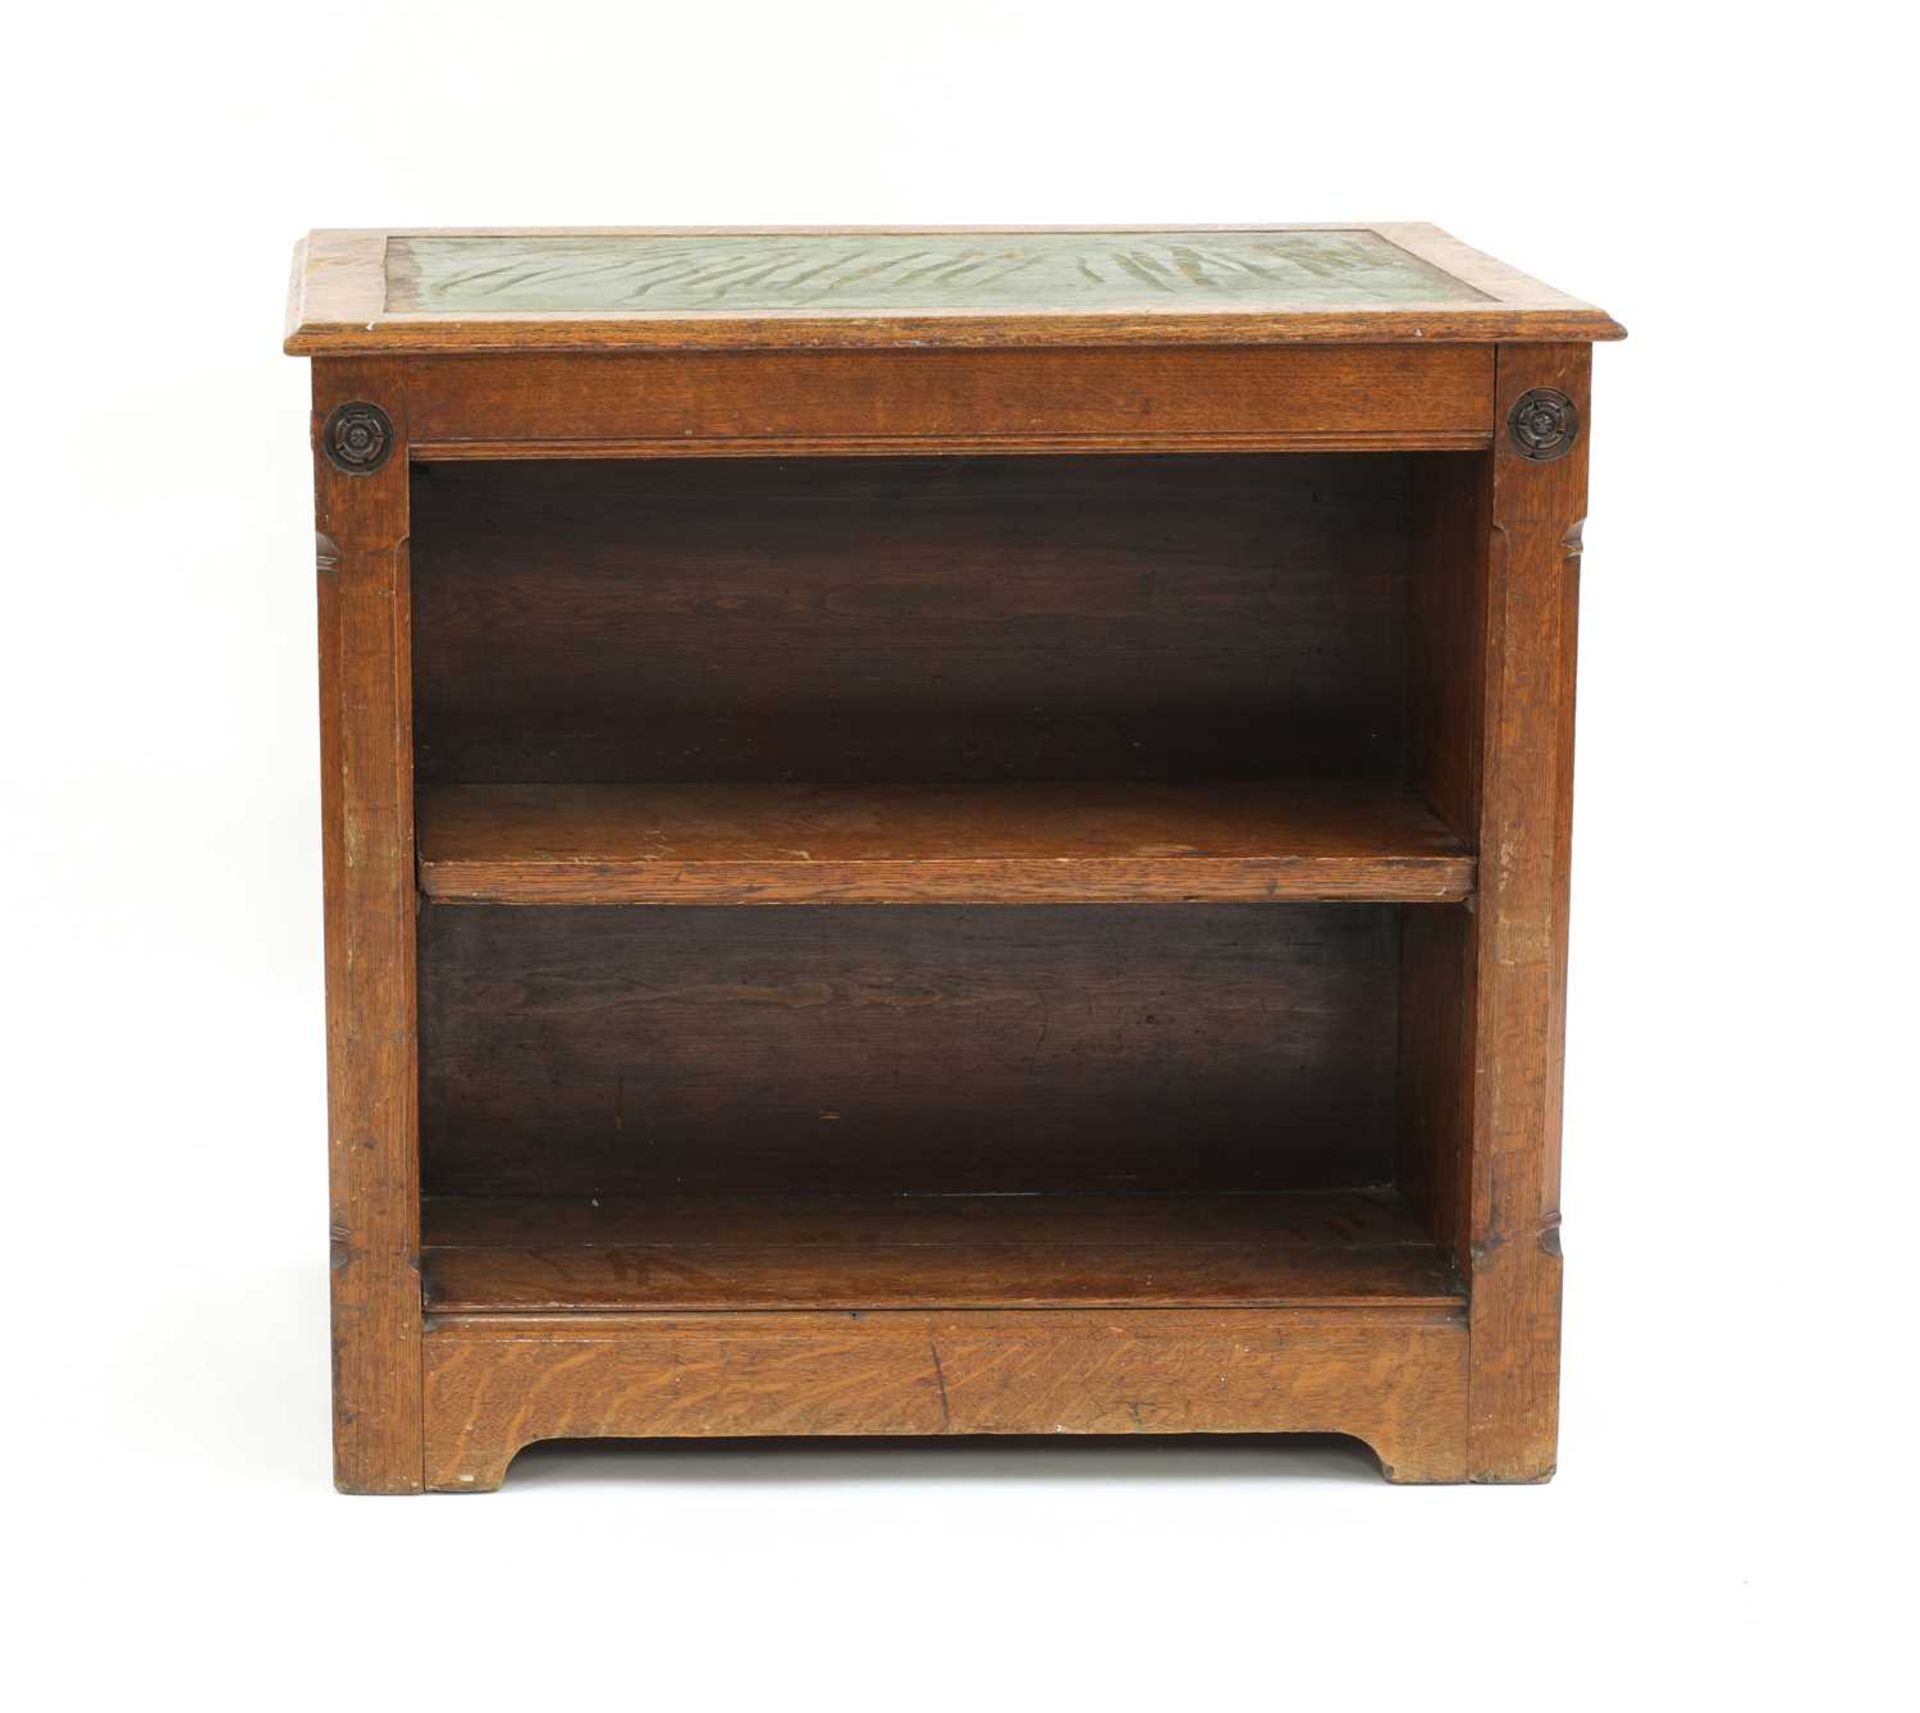 An oak Gothic Revival double-sided open bookcase, - Image 2 of 4